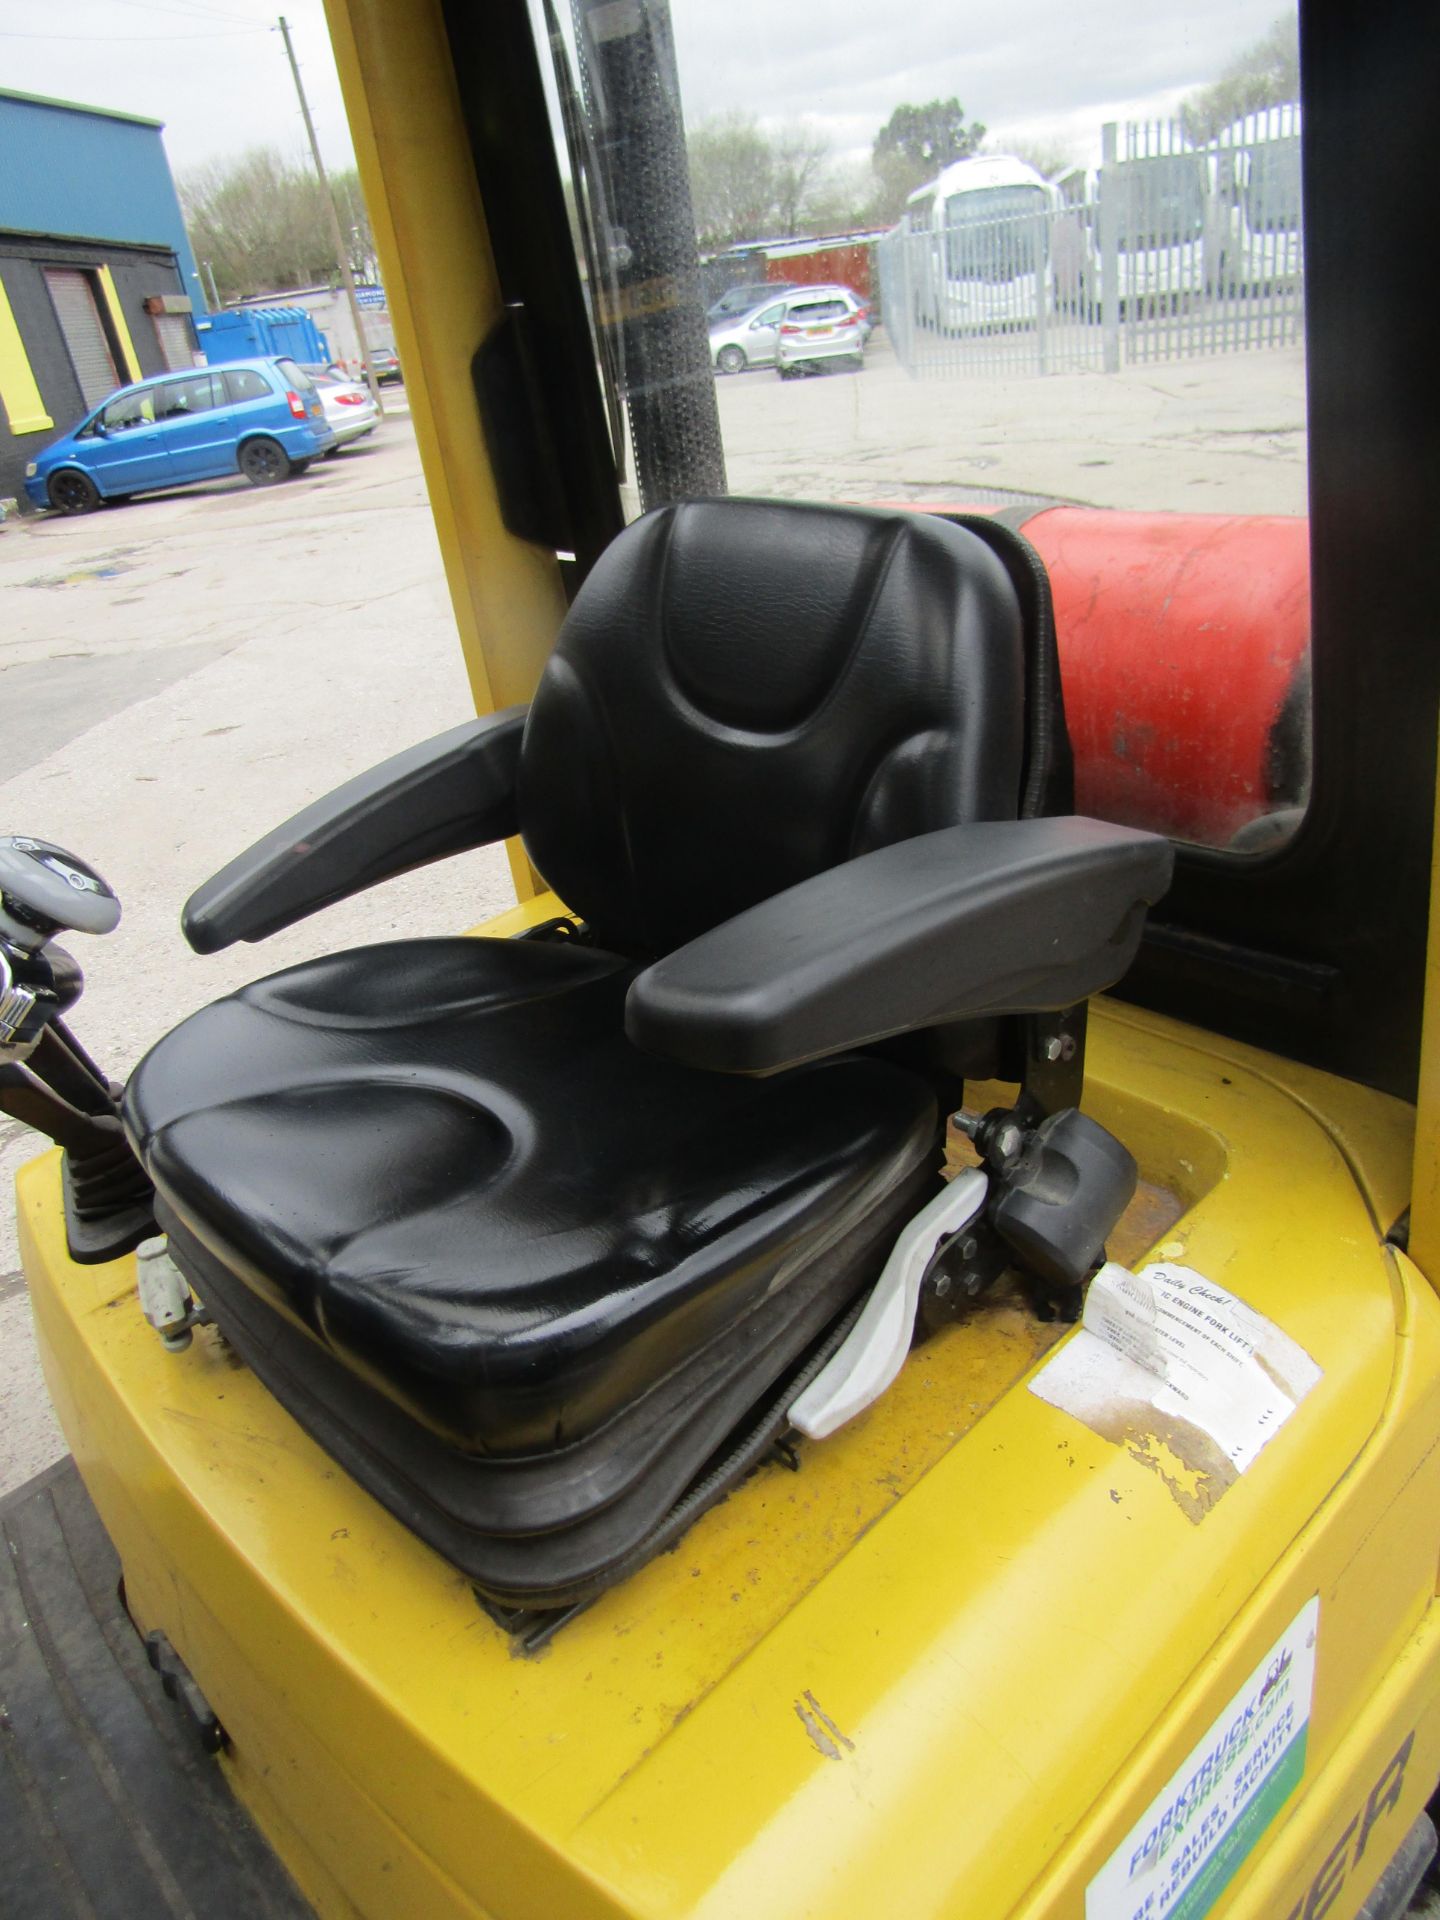 Hyster H2.00Xm Forklift Truck 7235 hours currently manufactured in 2004, has a roof as well as front - Bild 5 aus 9